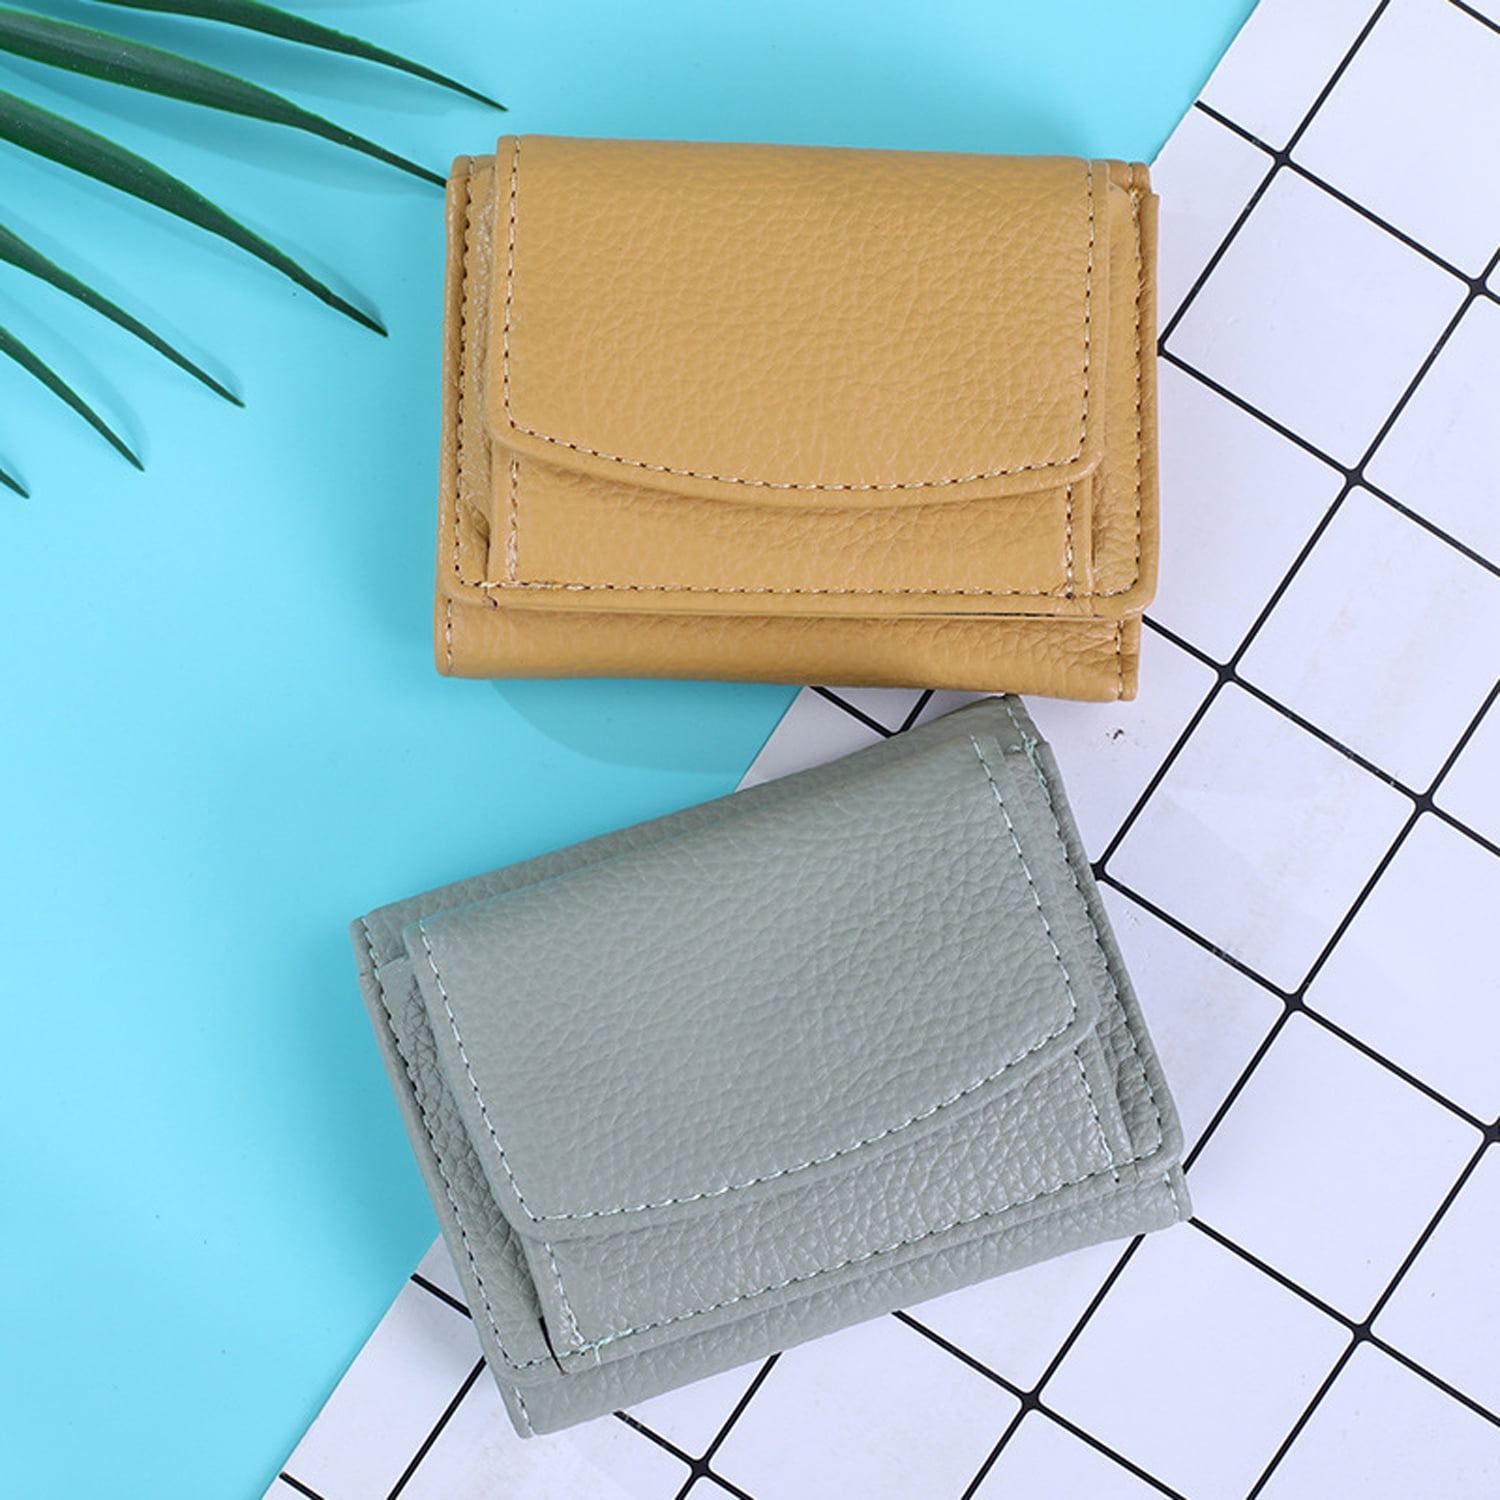 The 13 best crossbody phone bags and cases to shop